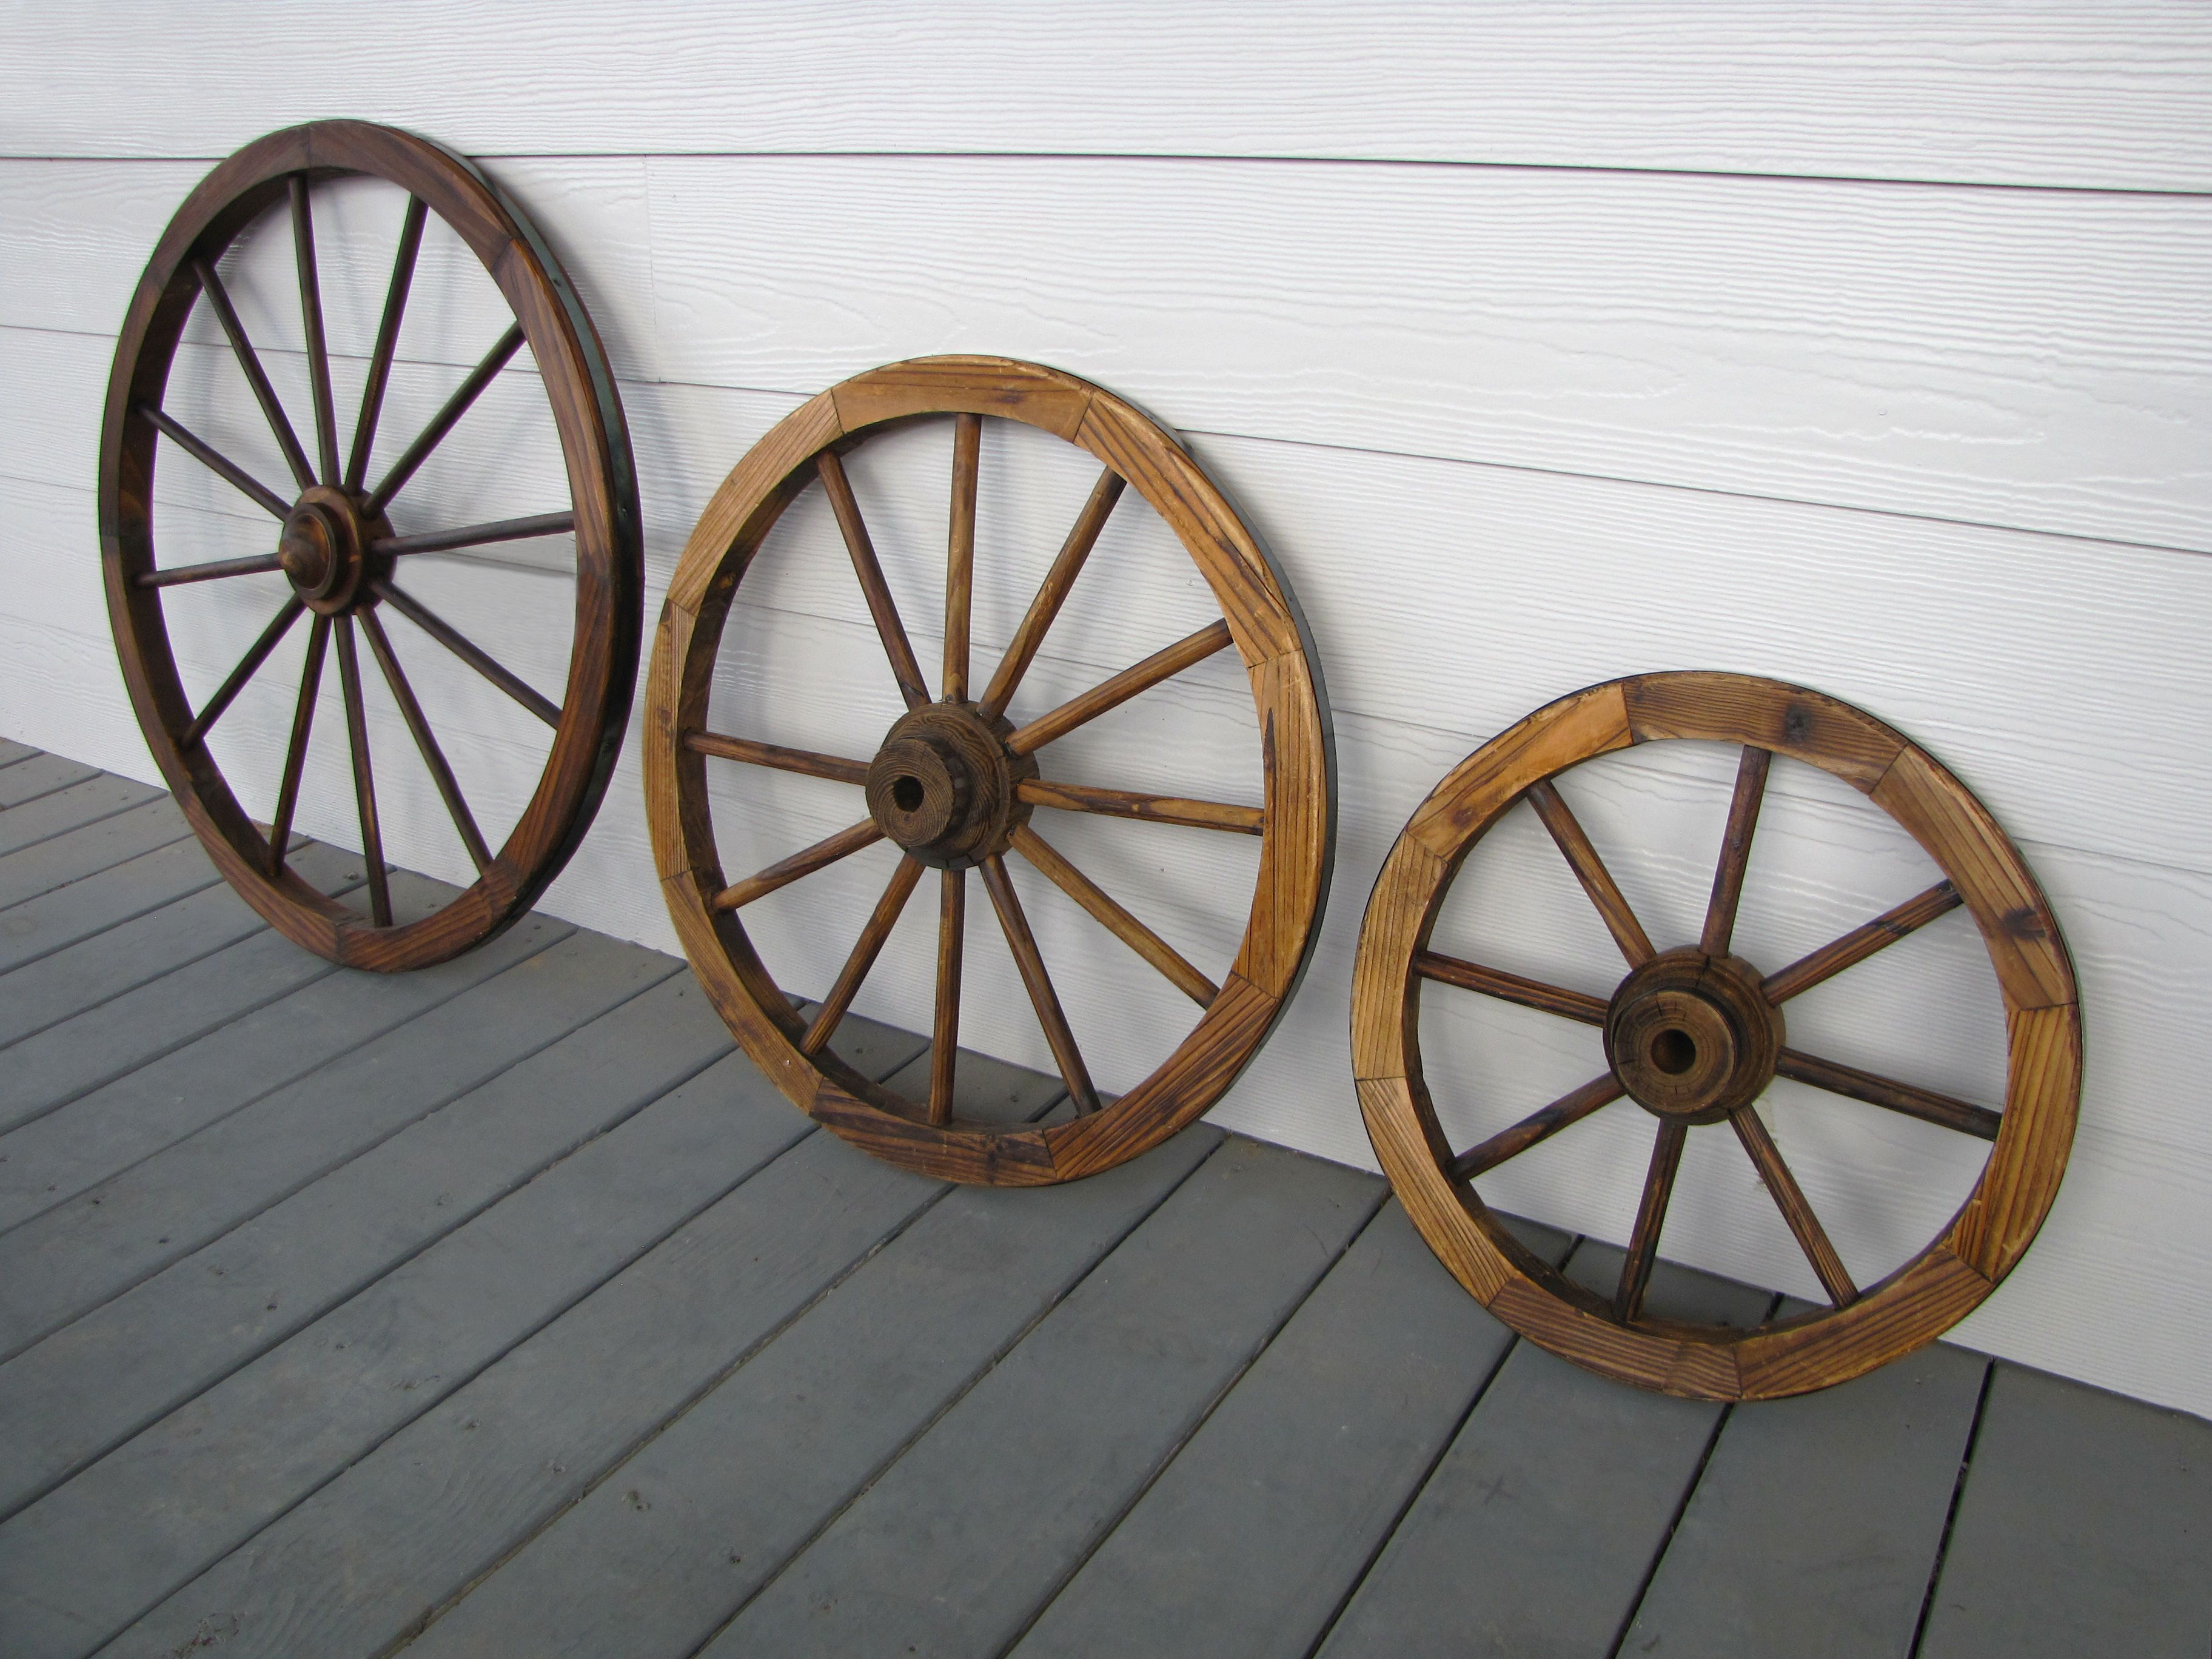 Leigh Country Eighteen Inch Decorative Wagon Wheel - image 4 of 7